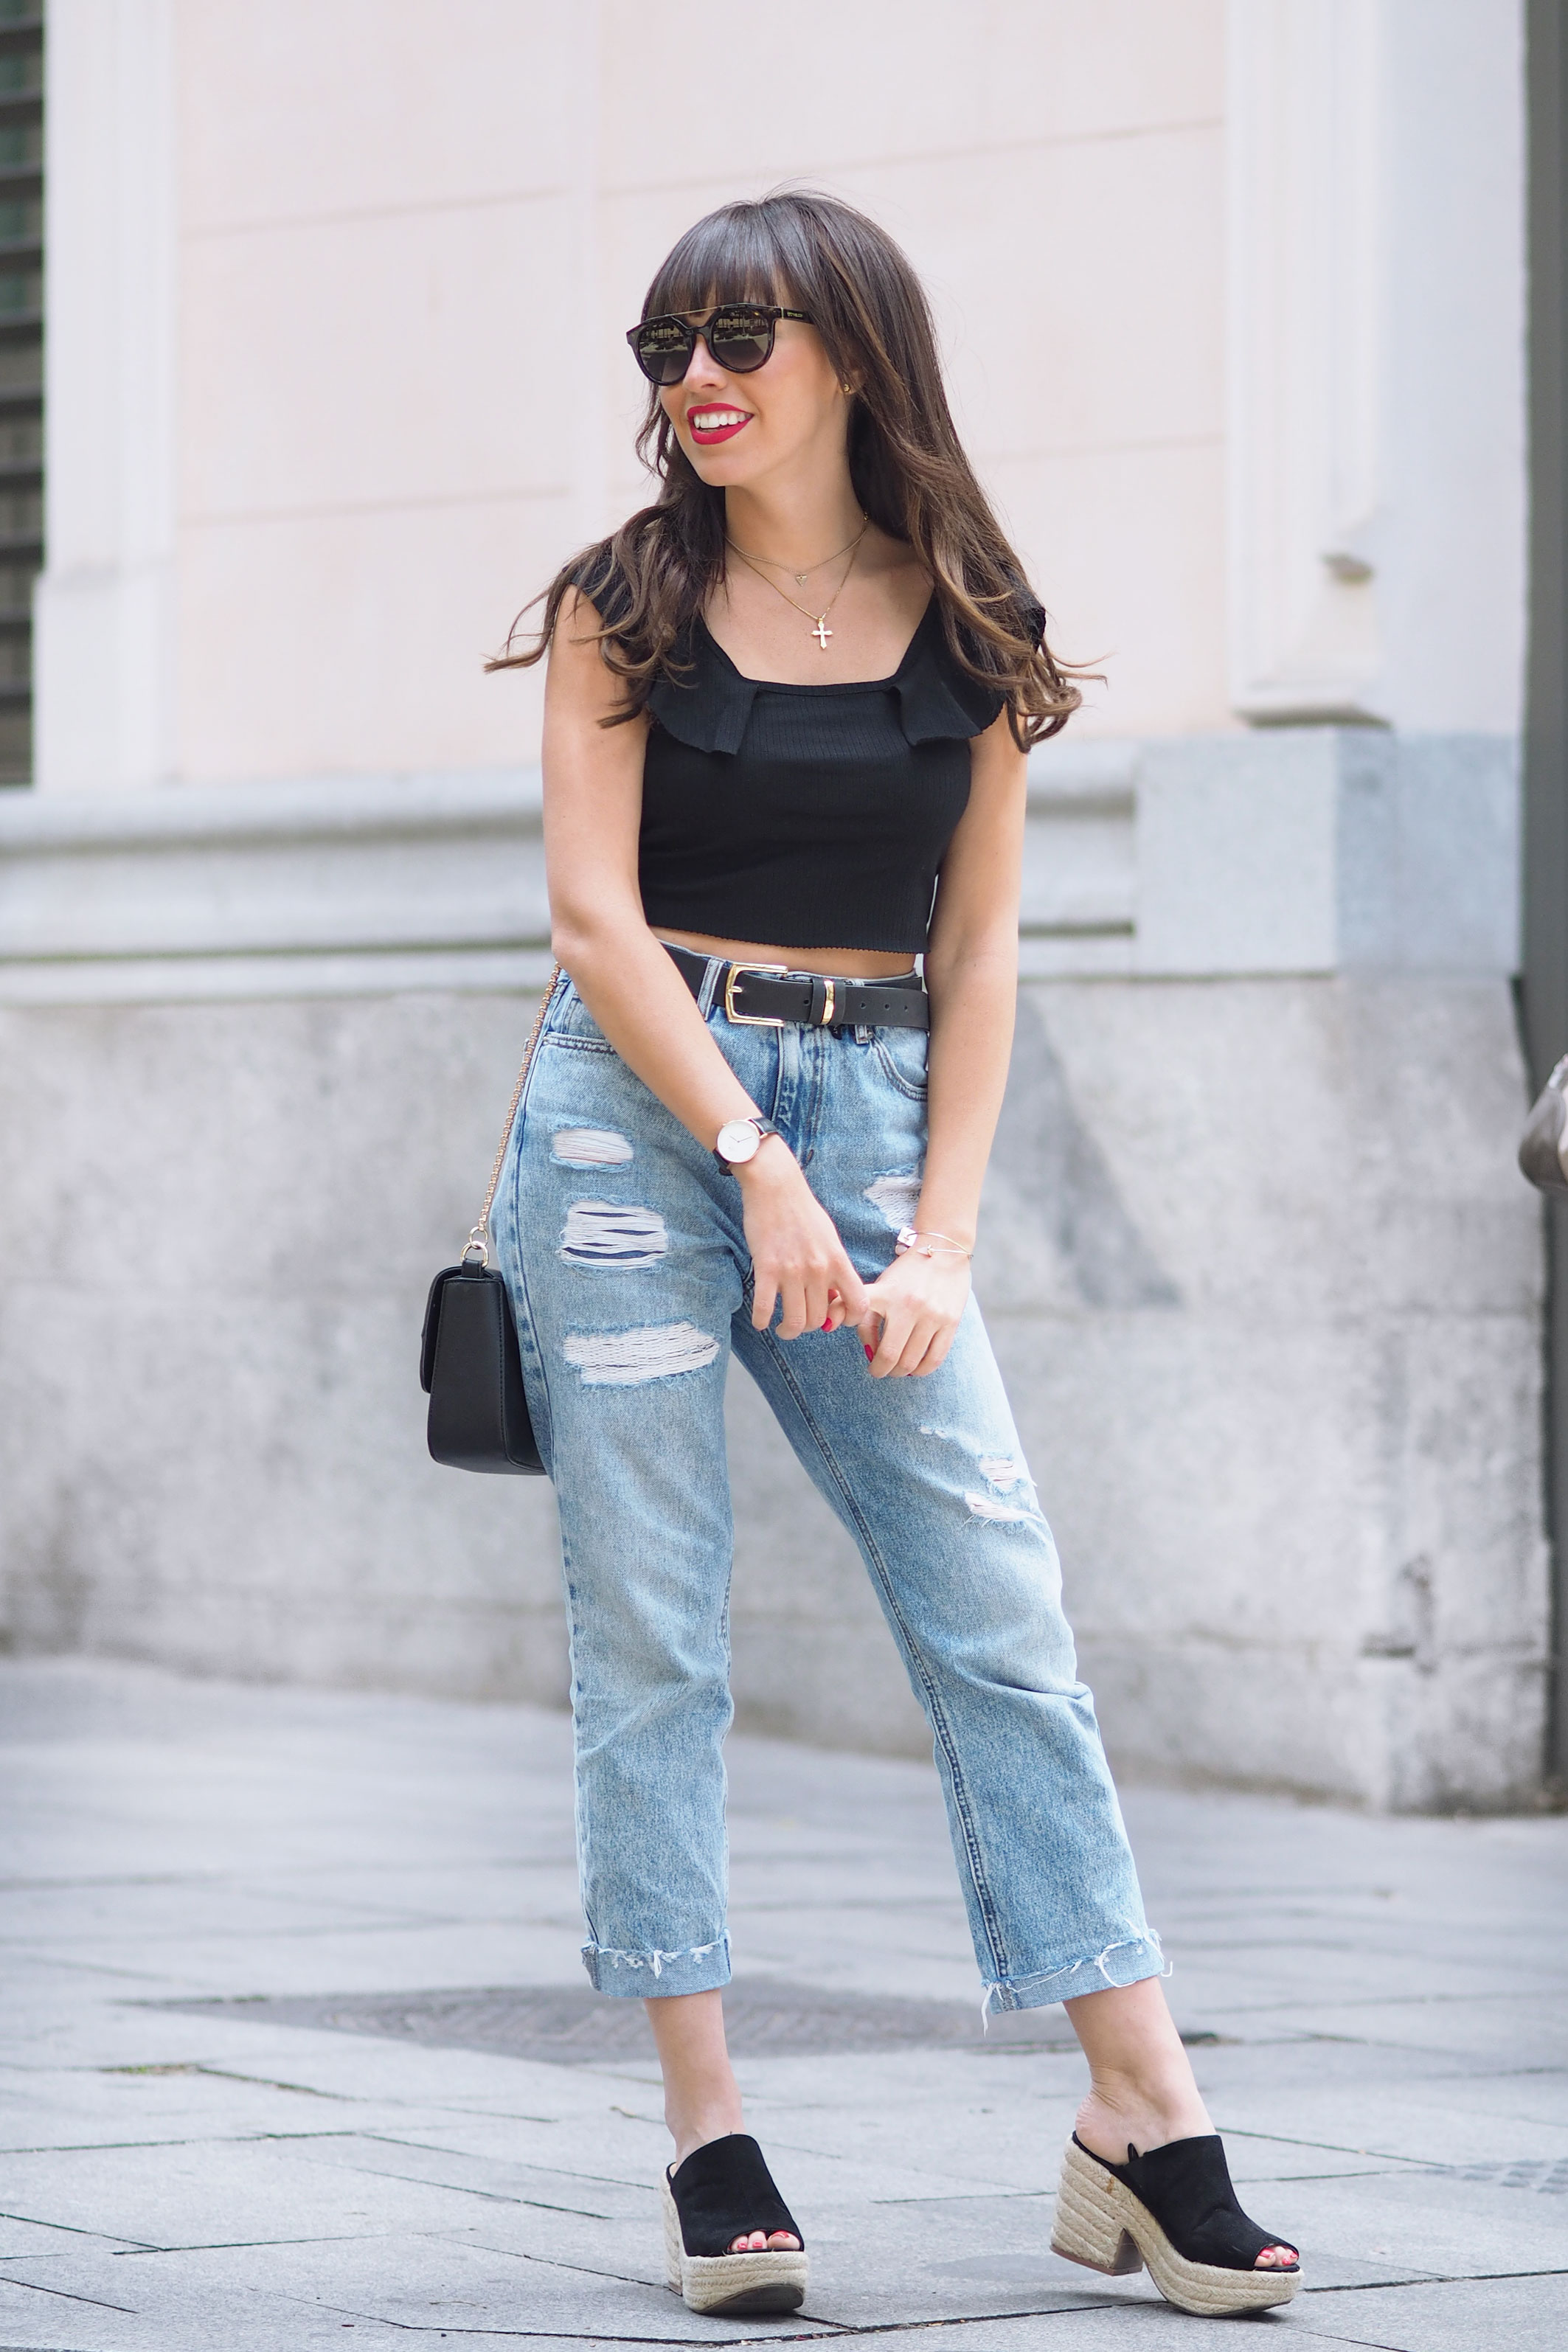 BLACK TOP SPRING OUTFIT - Wear Wild